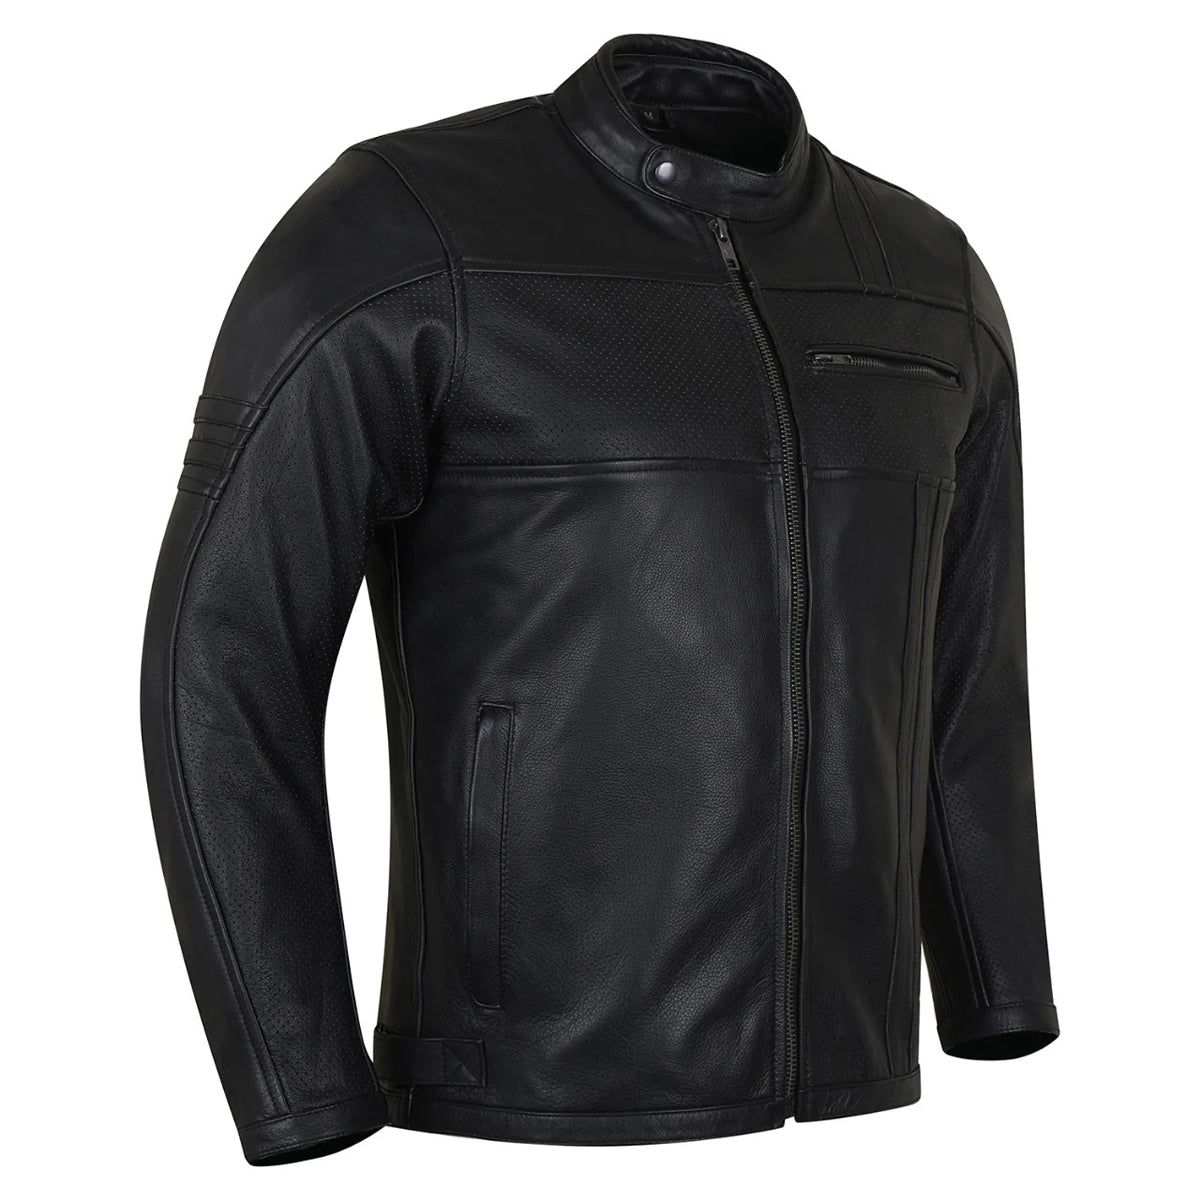 Vance Leathers' Men's Commuter Cafe Racer Motorcycle Leather Jacket with Armor